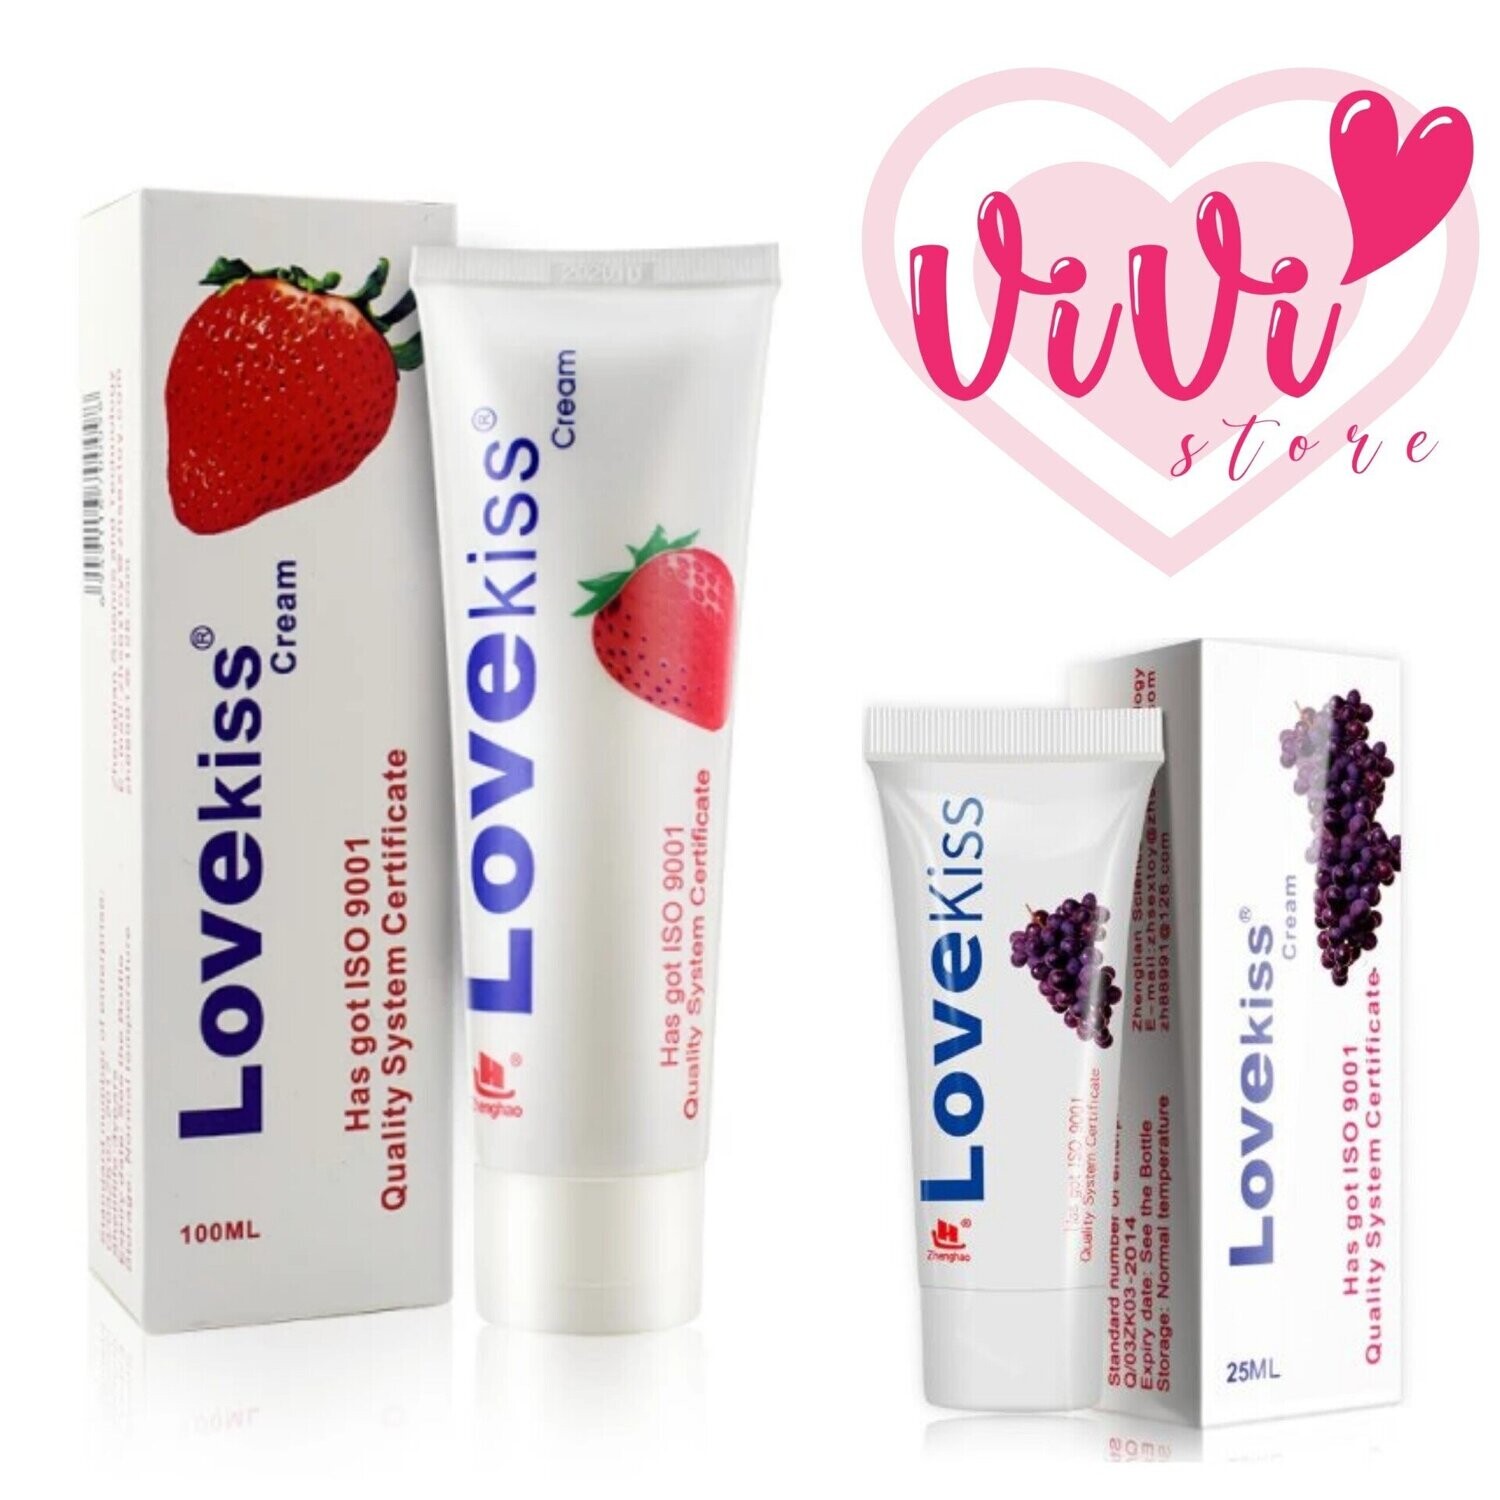 Lovekiss Grape Strawberry Water Based Lube Body Personal Lubricant Malaysia